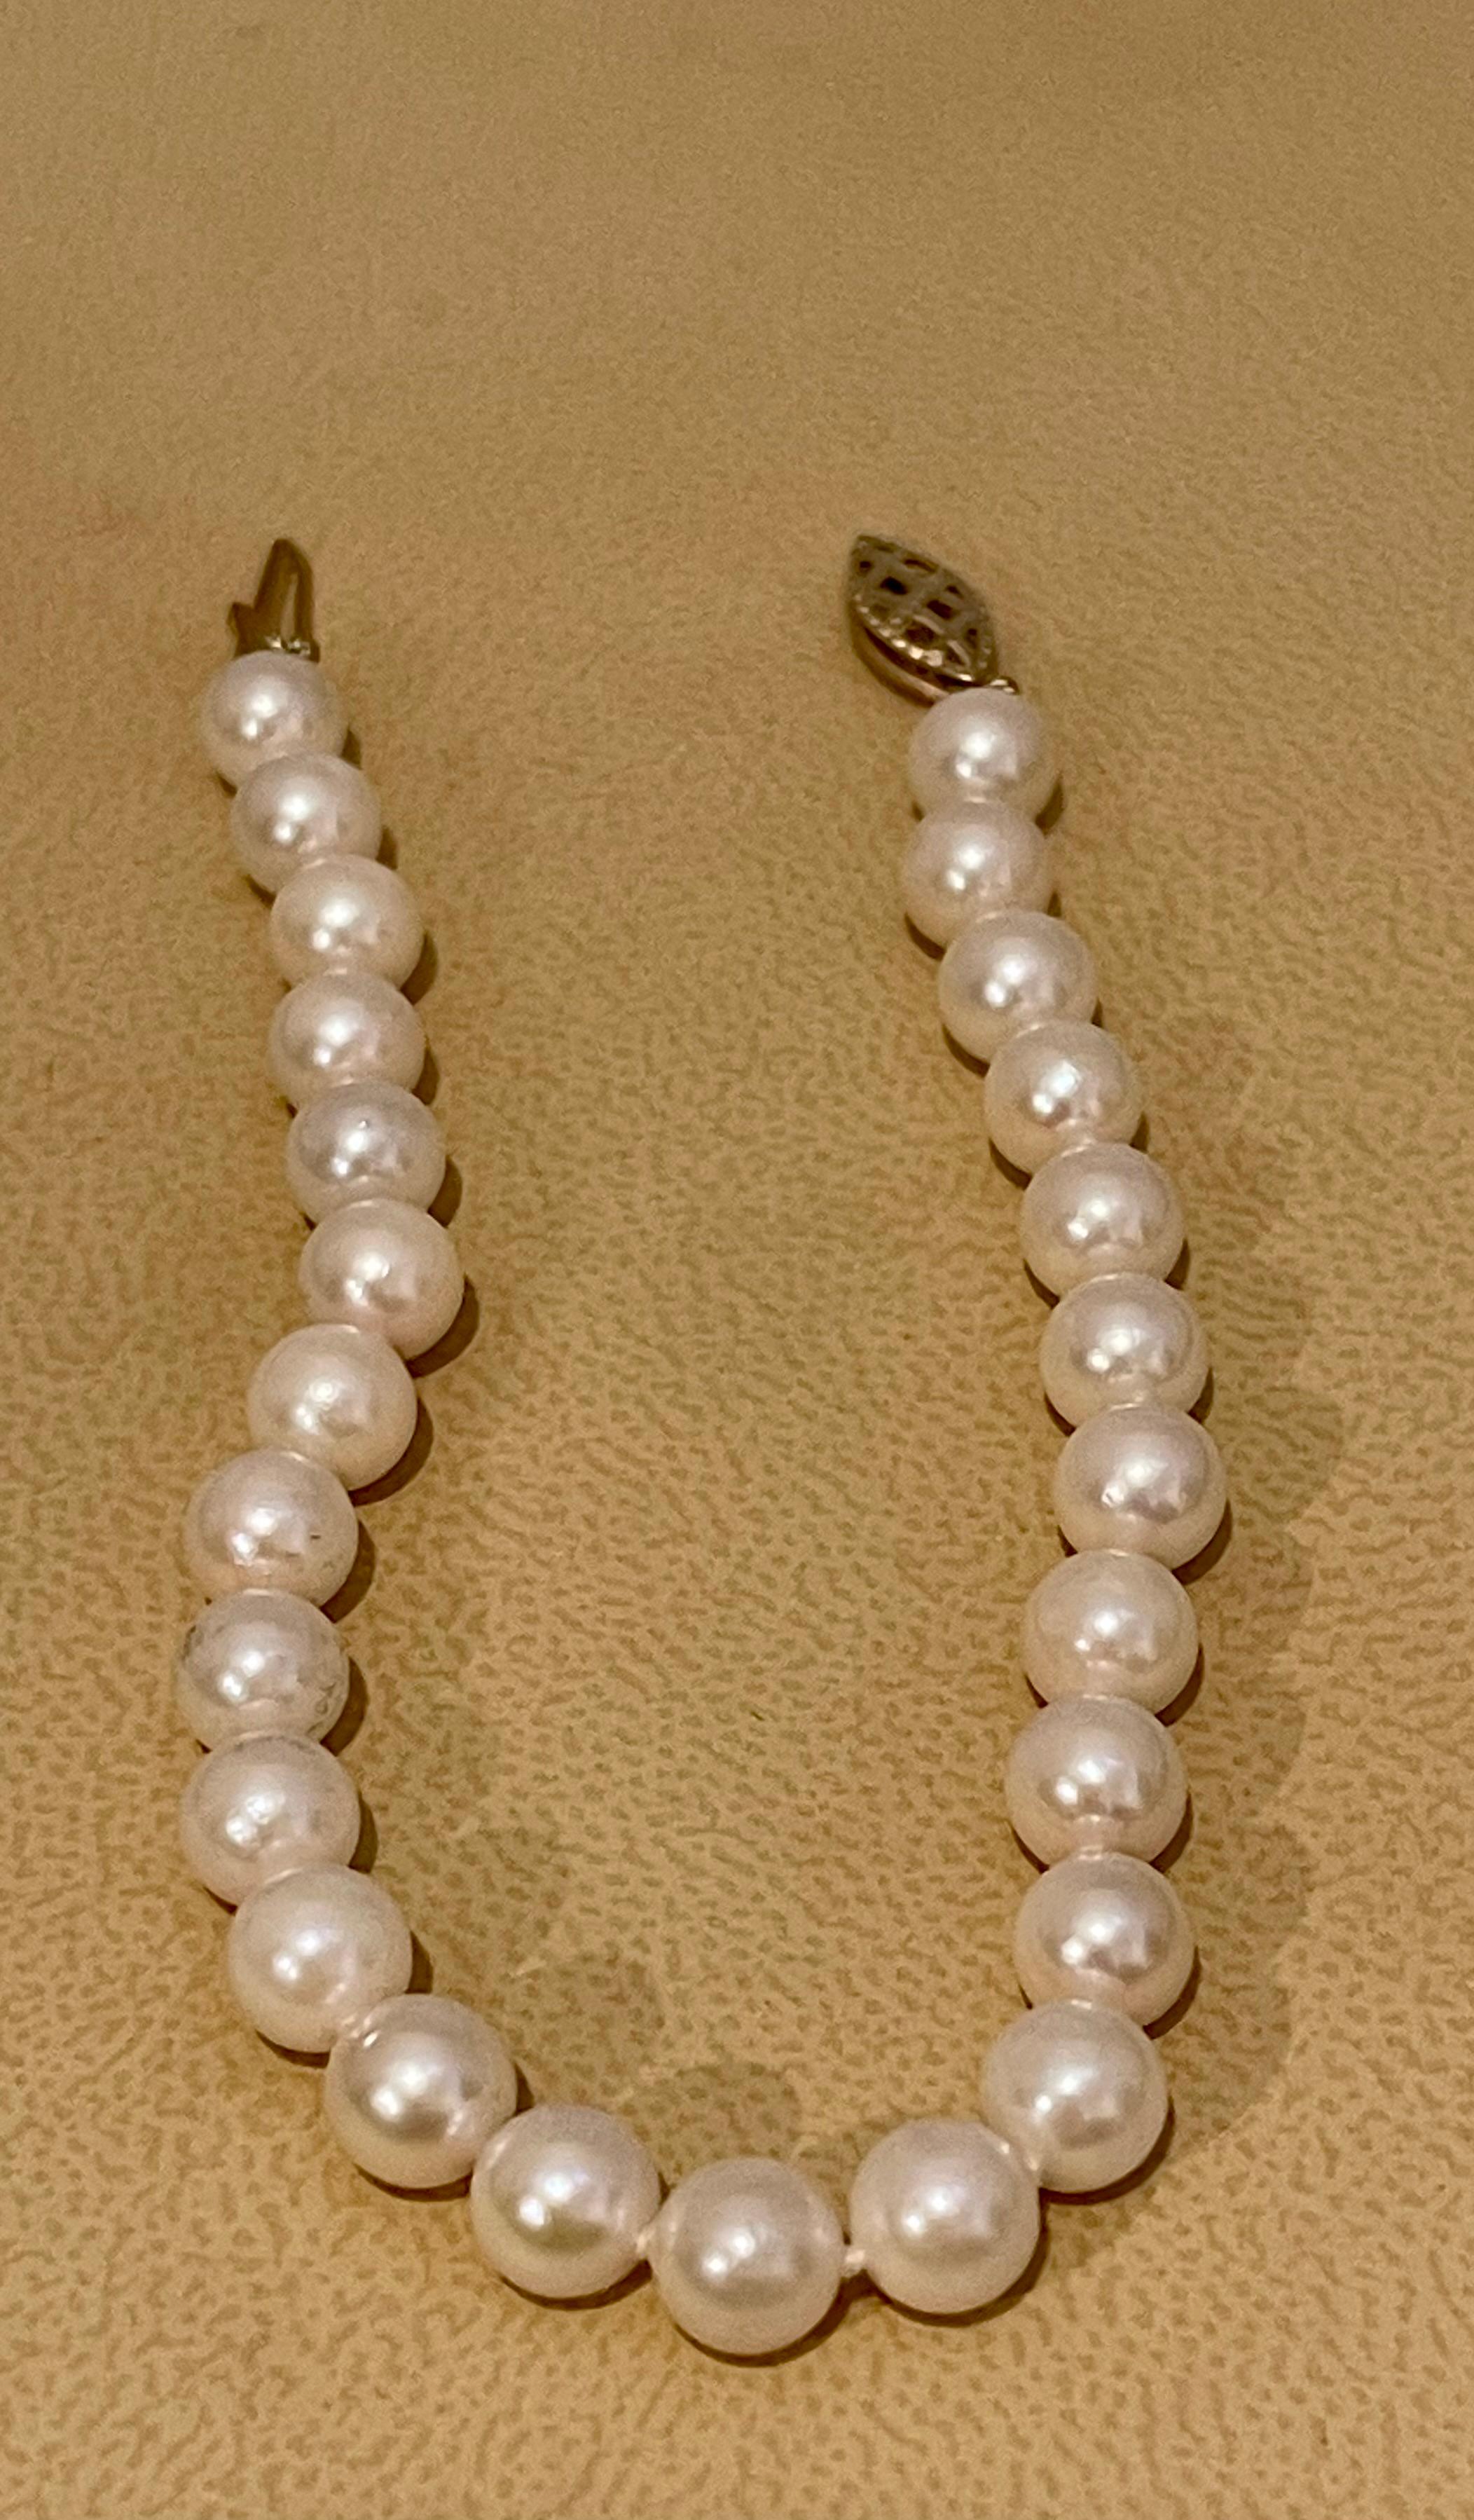 Vintage 6 MM  Classic Japanese Akoya Pearl Single Strand Bracelet, Yellow Gold
measuring approx. 6 mm 
White color
VINTAGE

PRE-OWNED 
 ESTATE PIECE

Length of  Strand including clasp  7 Inch
PEARLS ARE AVERAGE 6 MM
ALL PEARLS ARE WHITE